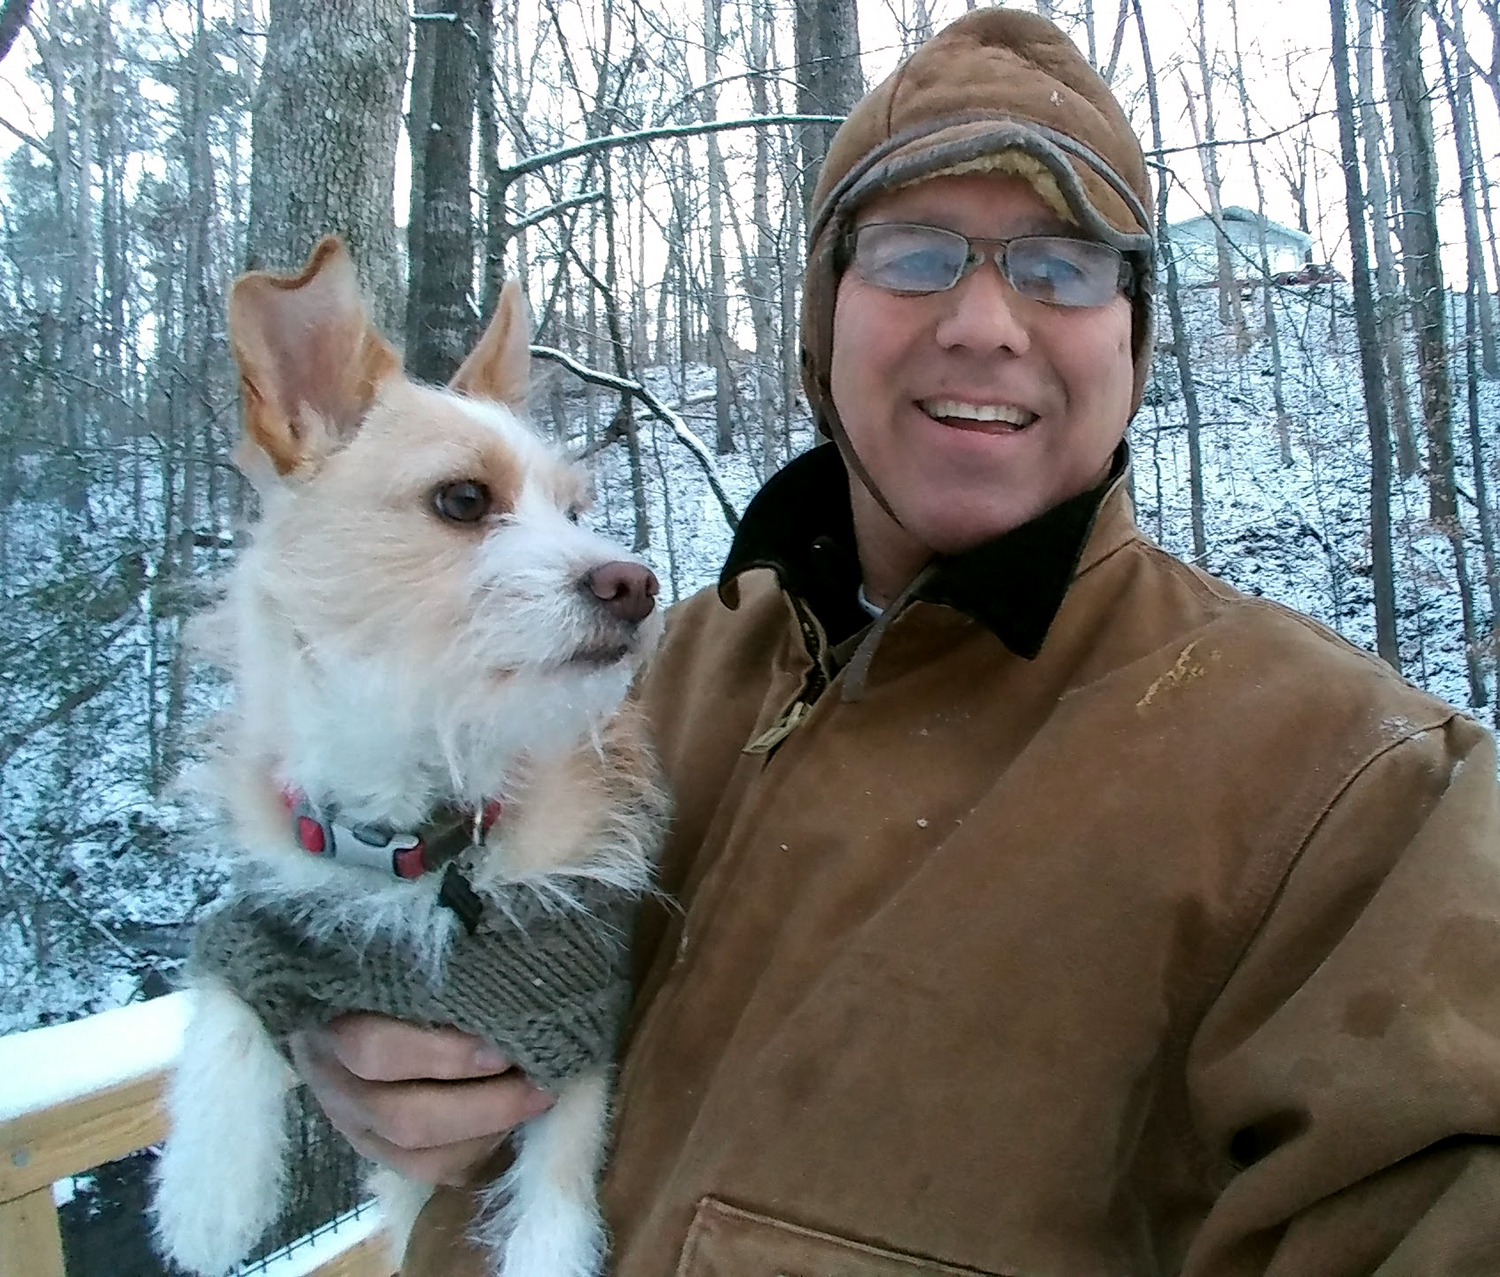 Charlie, the Blond Rat Terrier and Maltese mix is pictured alongside Harold Mayer on a snowy day.